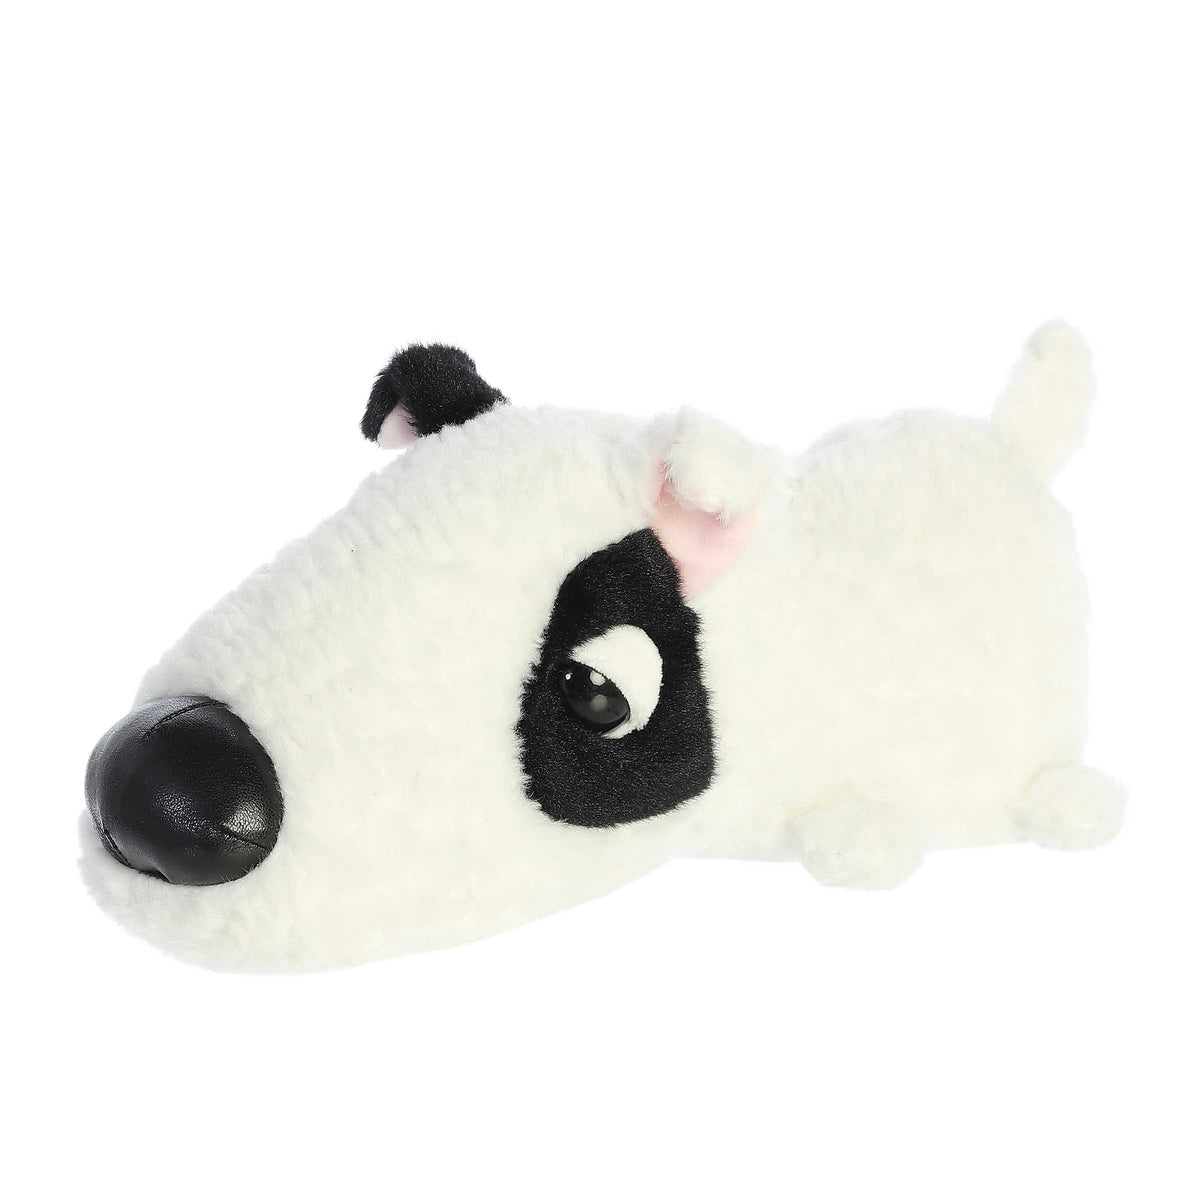 Bronte Bull Terrier from Schnozzles, with a playful snout and soft build